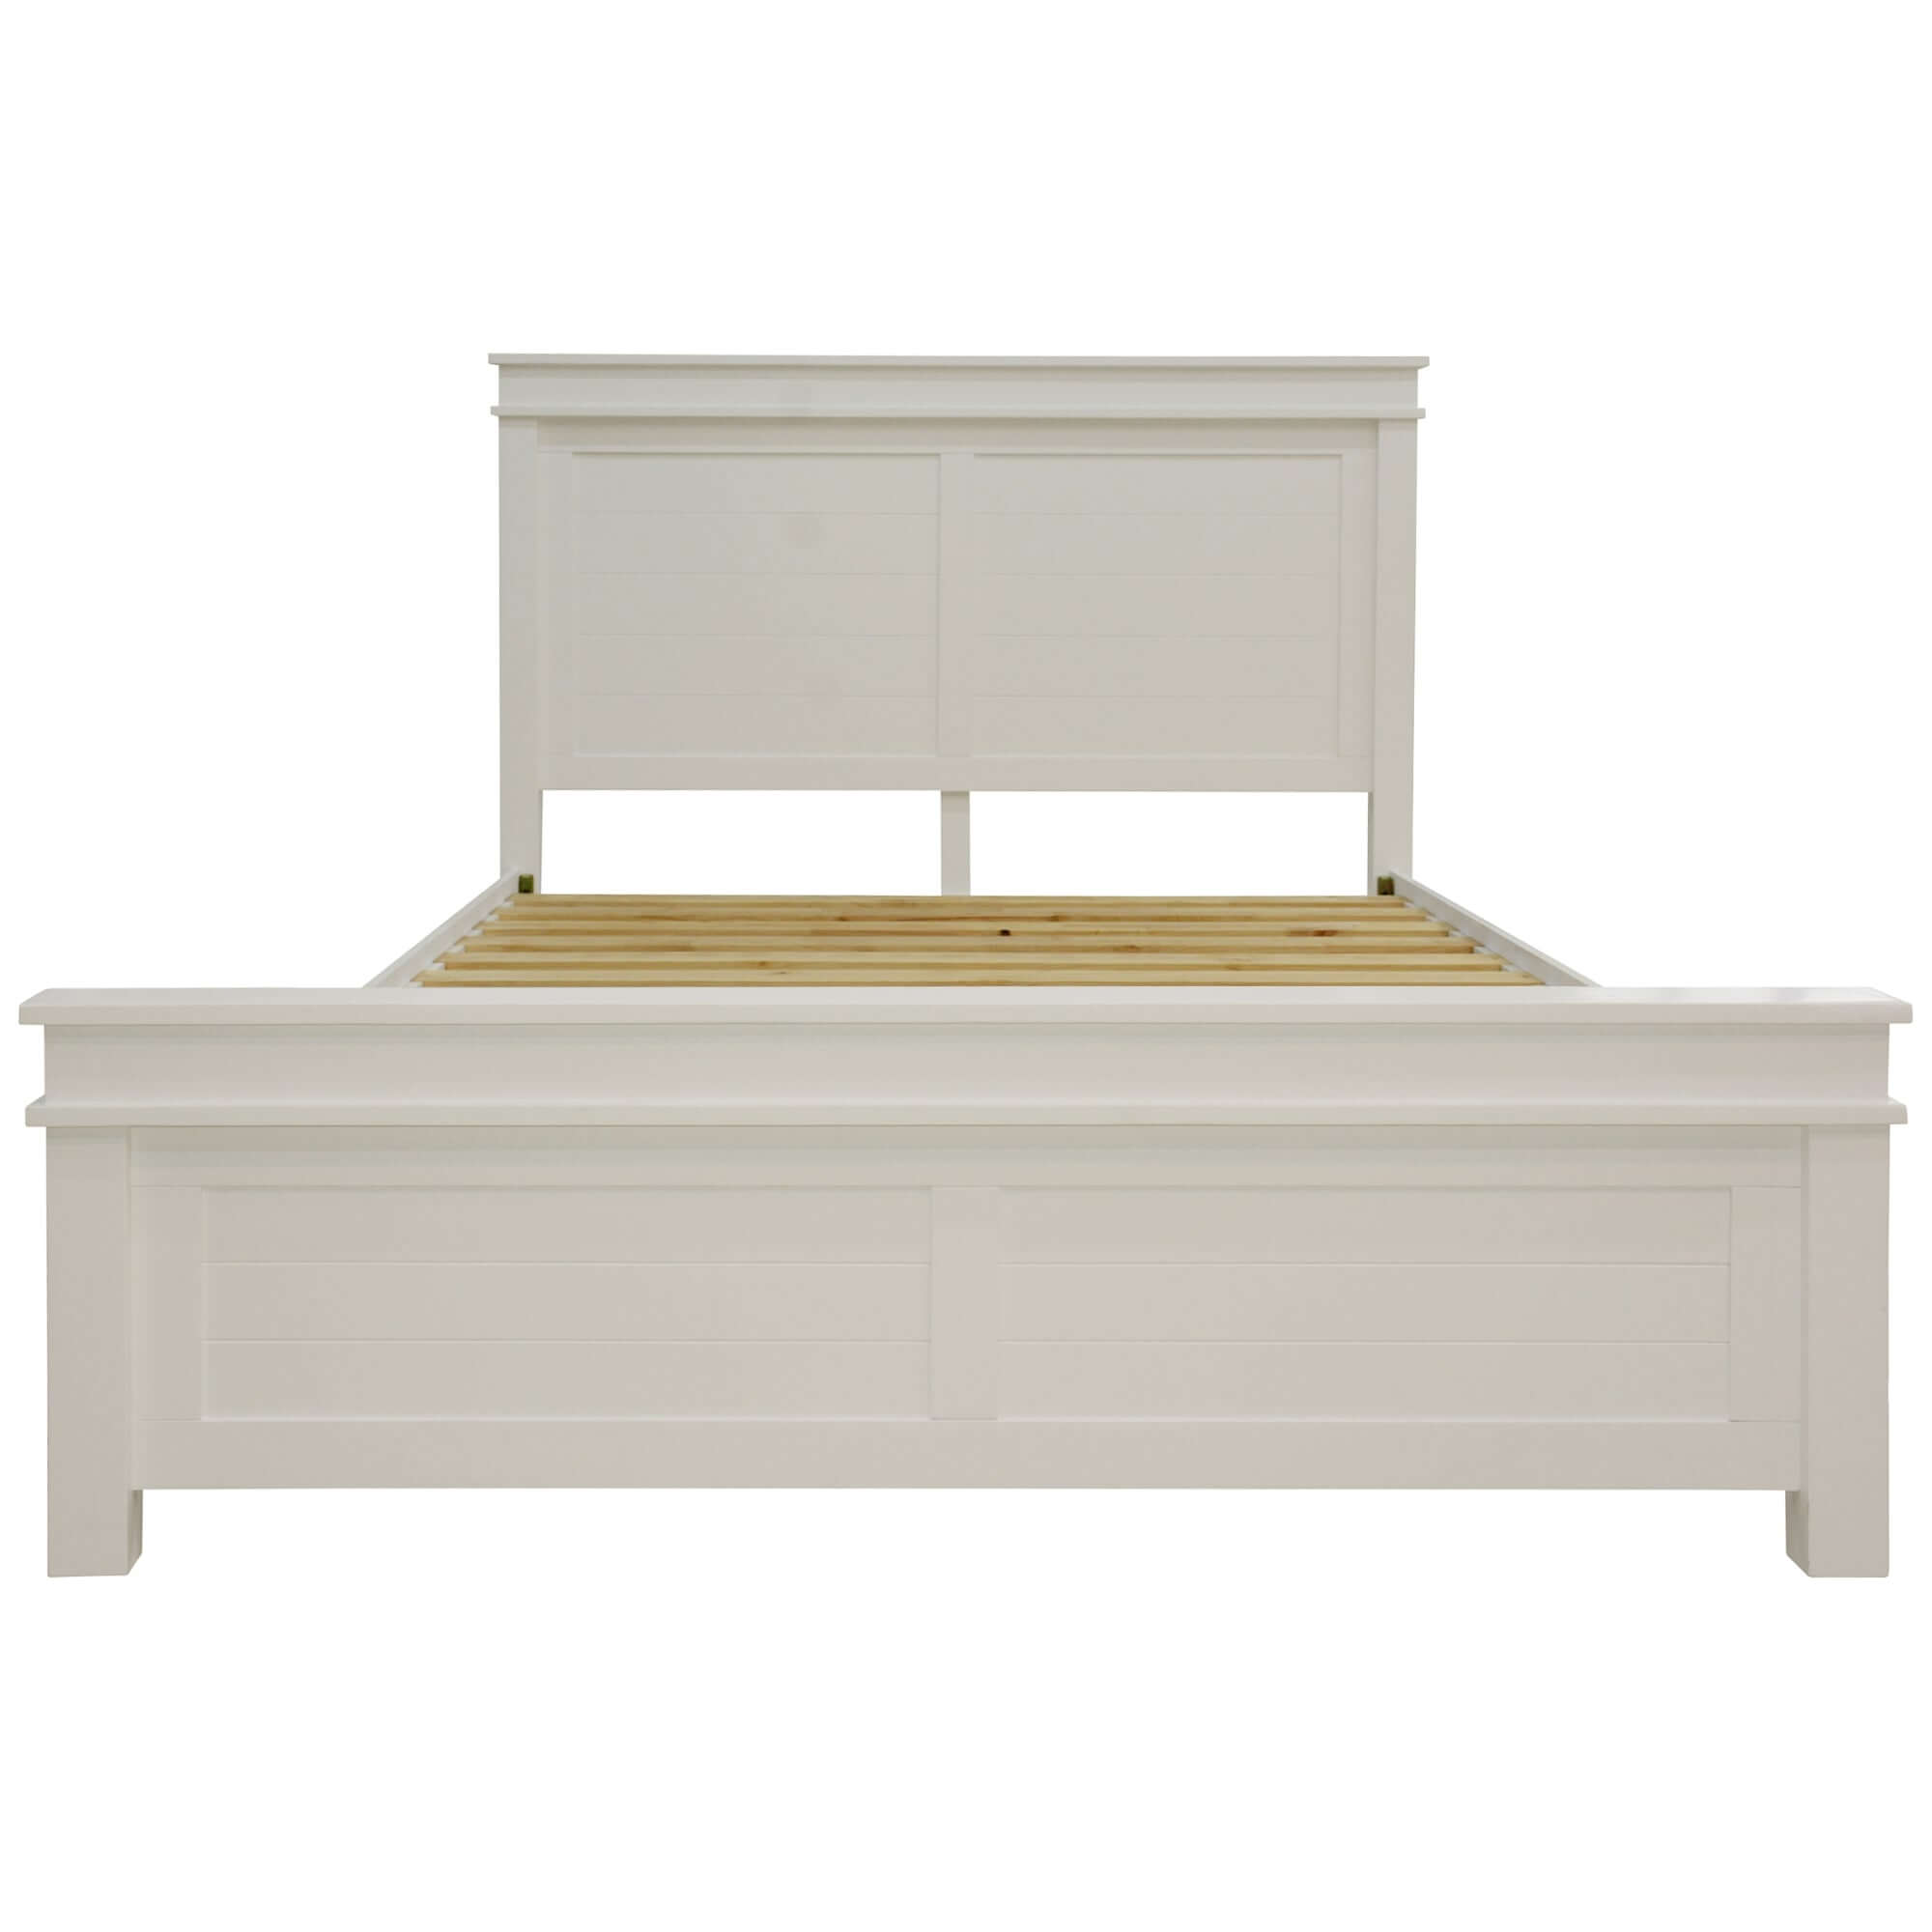 Lily King Bed Suite 5pc Set - Classic White Bedroom-Upinteriors